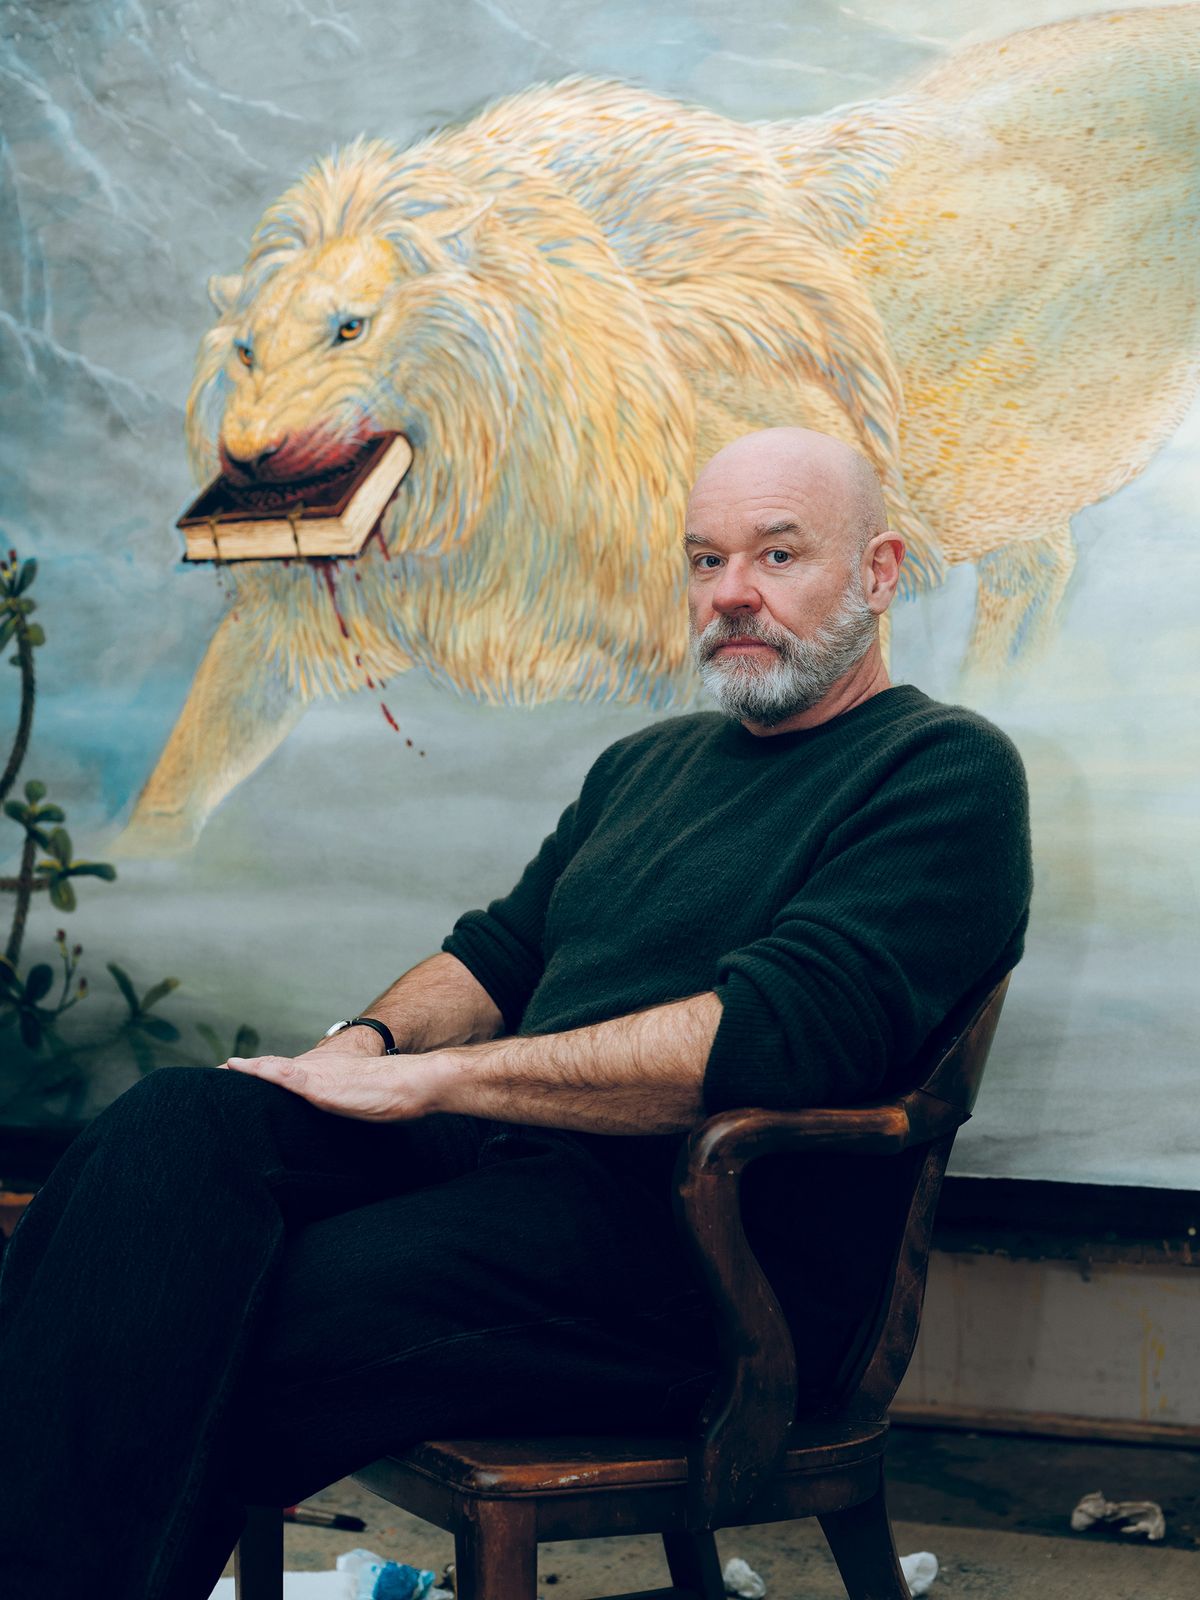 Lion’s share: In addition to his exhibition at the Morgan Library & Museum, Walton Ford is the subject of a show by Kasmin Gallery at the Ateneo Veneto in Venice Photo: Charlie Rubin; courtesy of the artist and Kasmin, New York